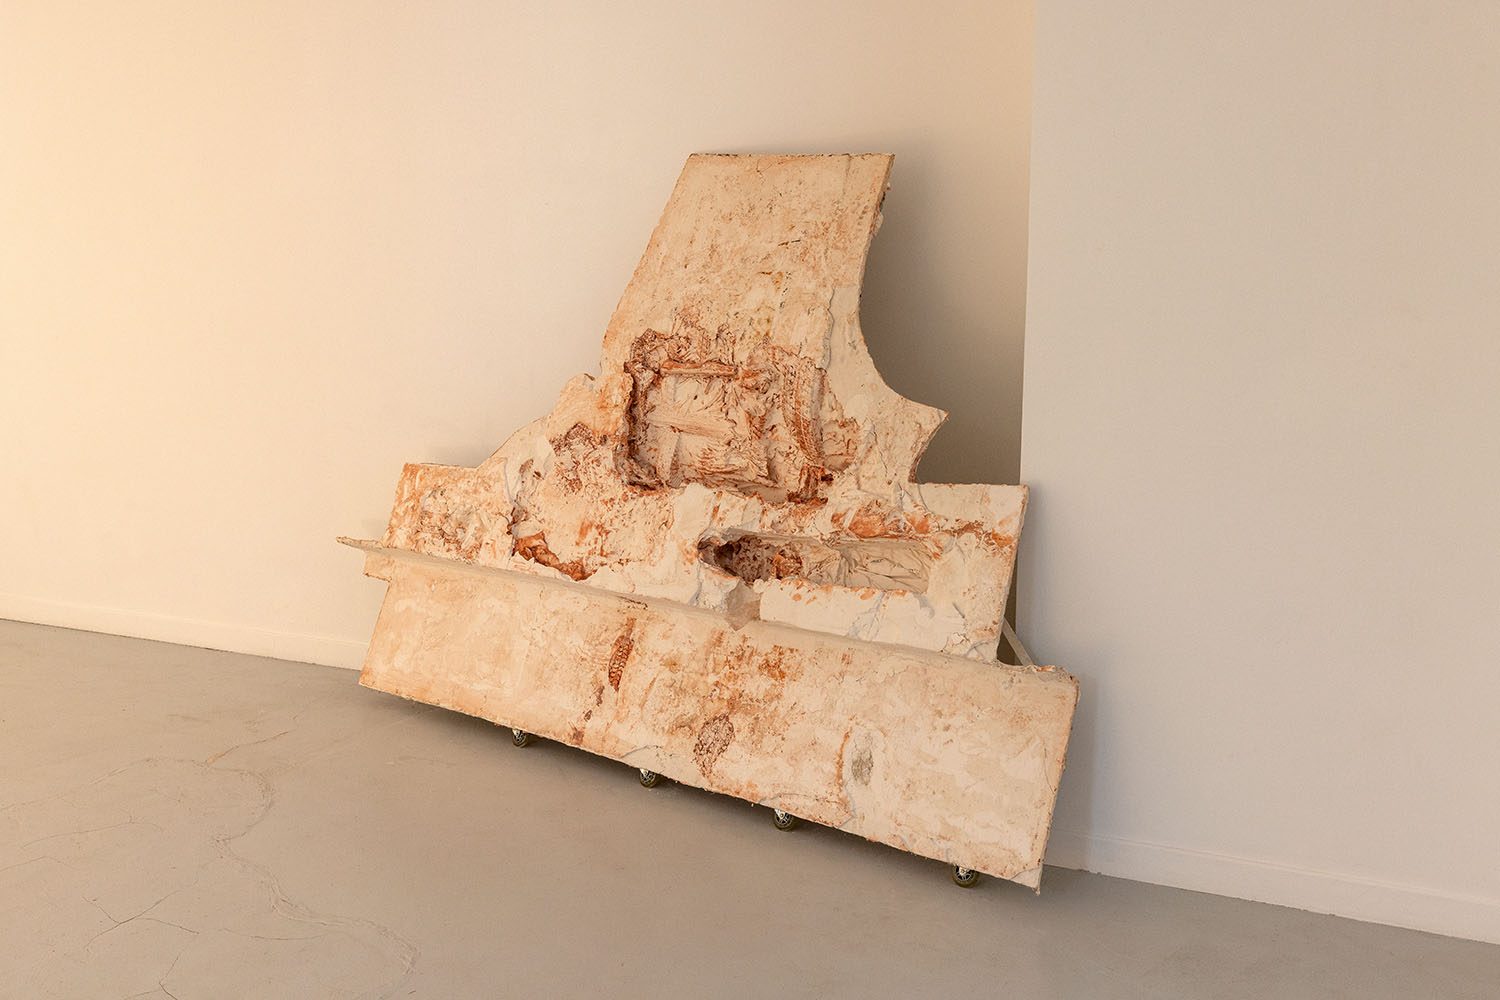 Rampe pour Philippe, 2022, red clay, plaster, mason's ruler, plate, wire, casters, various metal bars, 197 x 283 x 28 cm